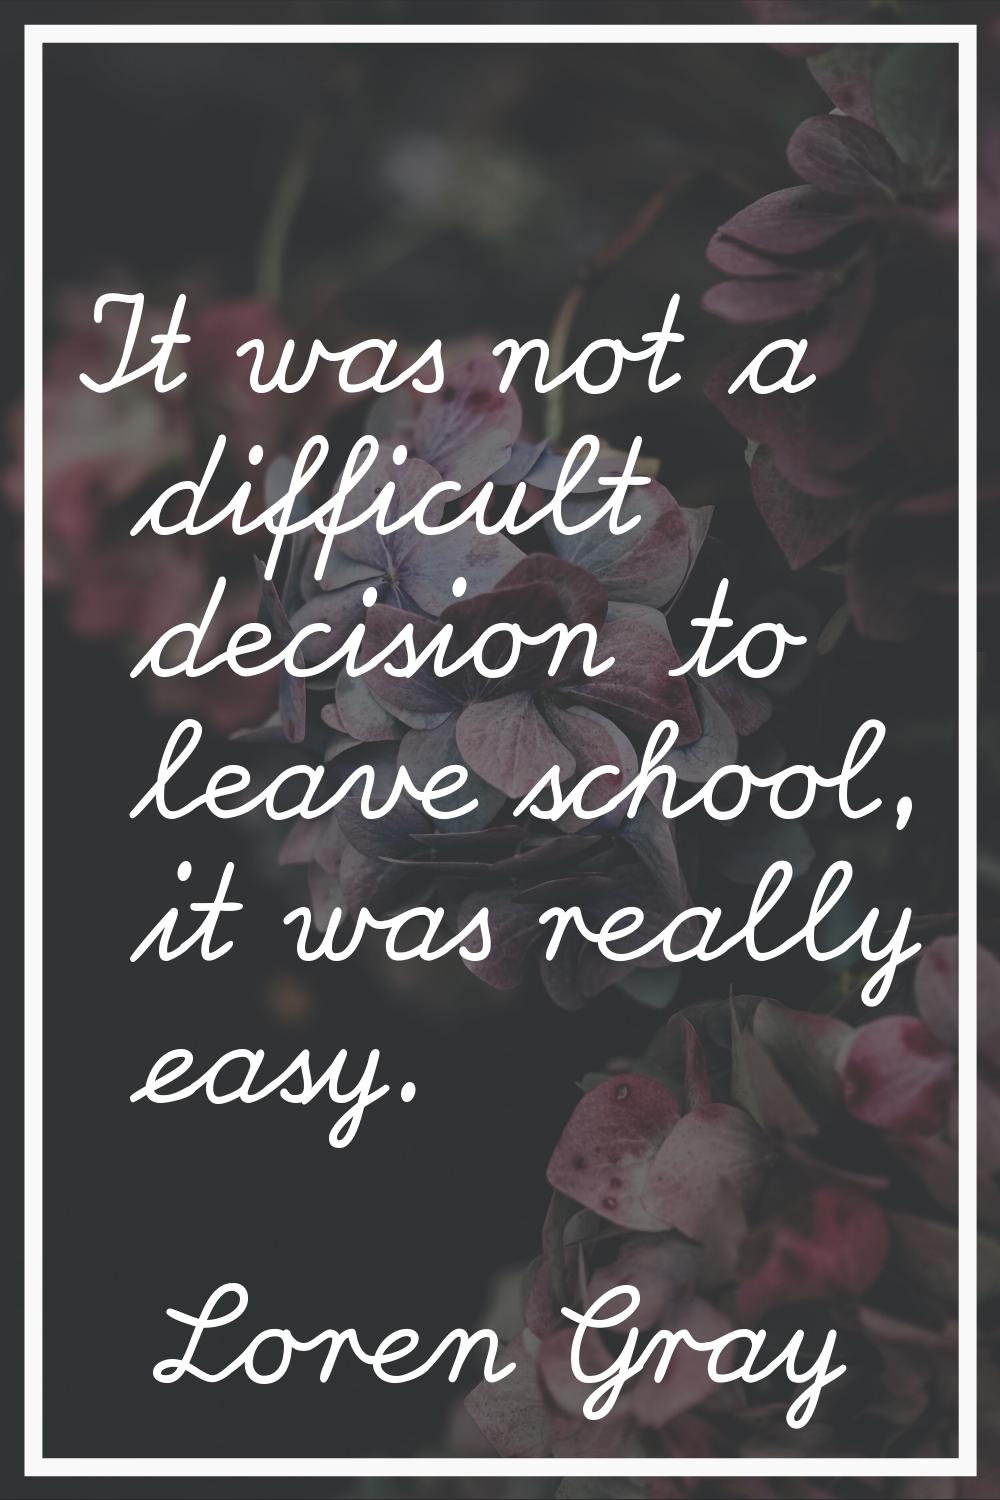 It was not a difficult decision to leave school, it was really easy.